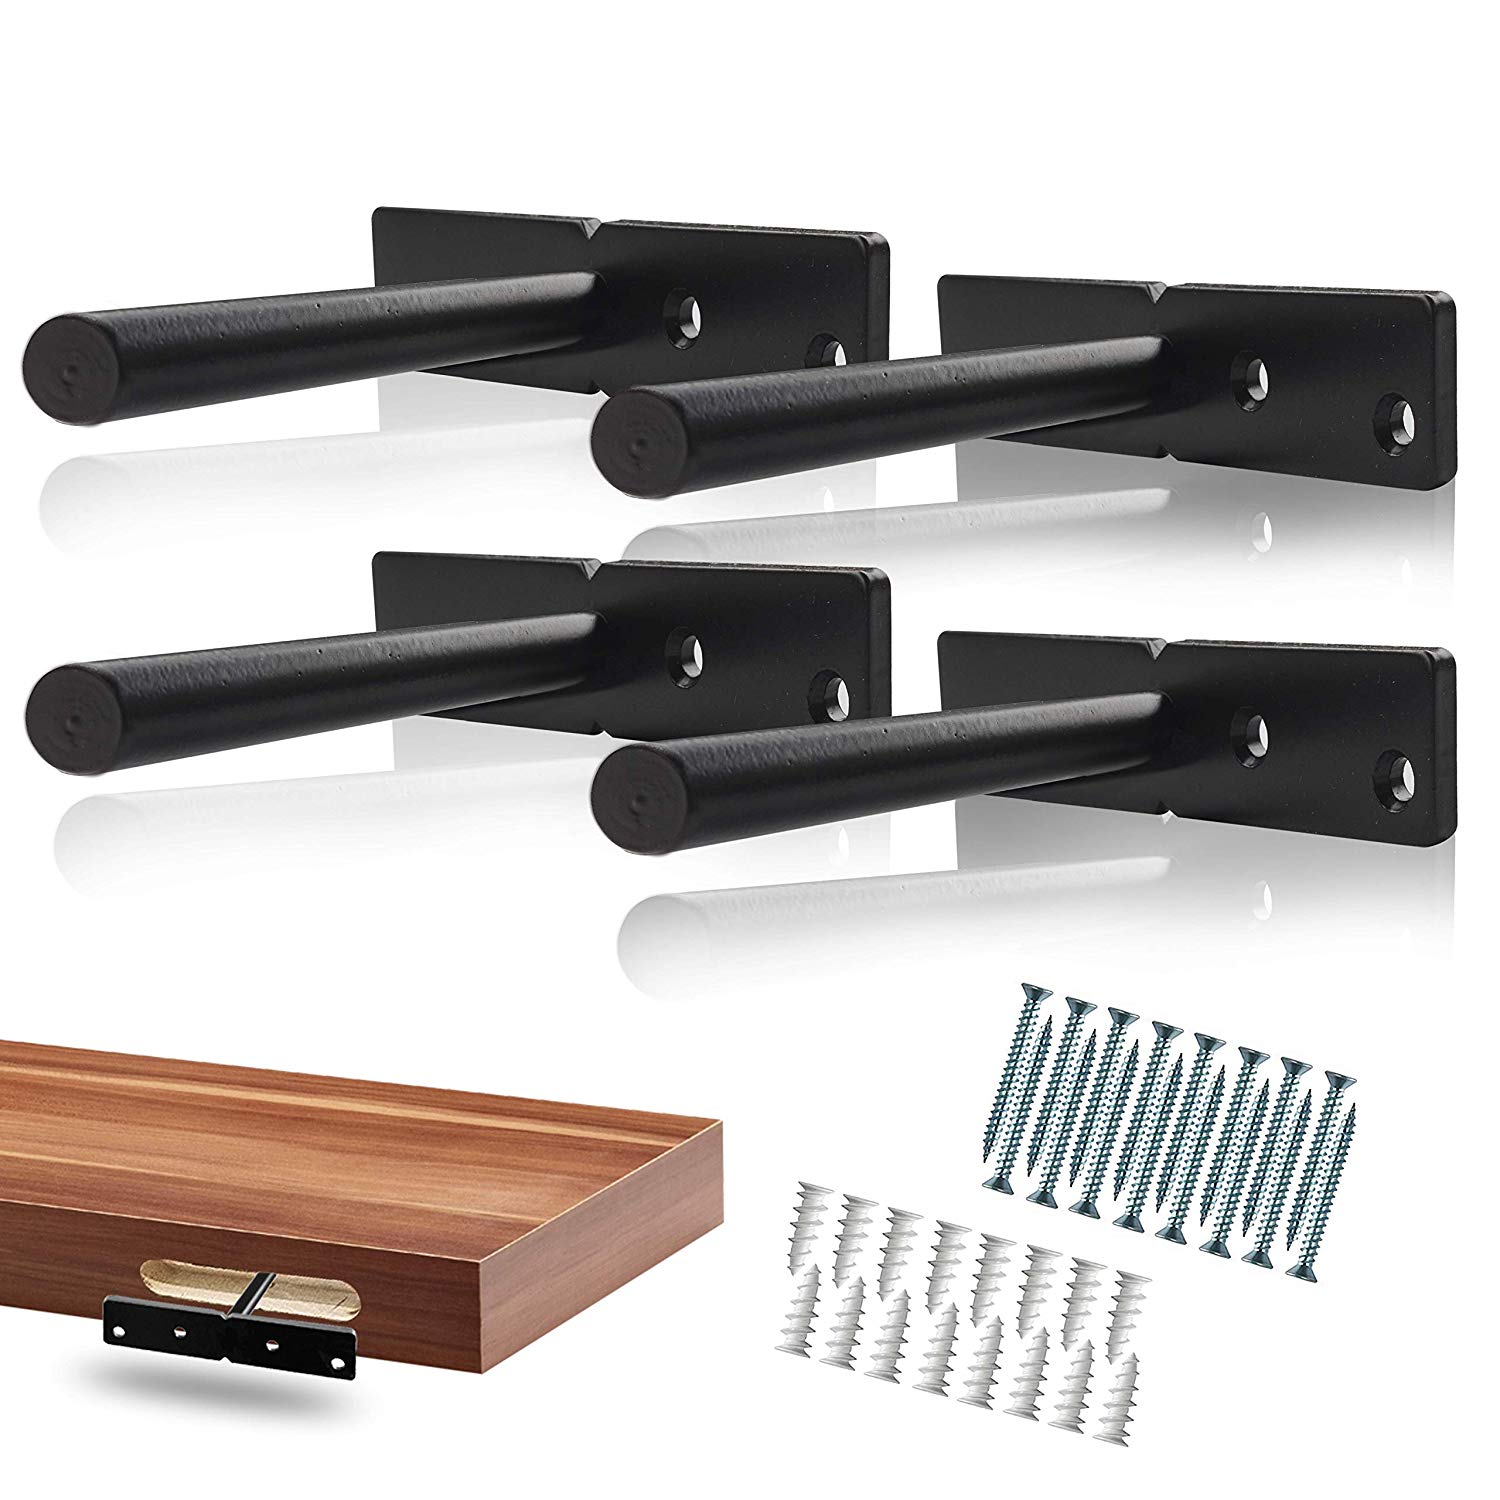 floating shelf bracket black heavy duty inch pack invisible brackets blind hidden steel supports for wood screws wall plugs included best space saving strongest command strips